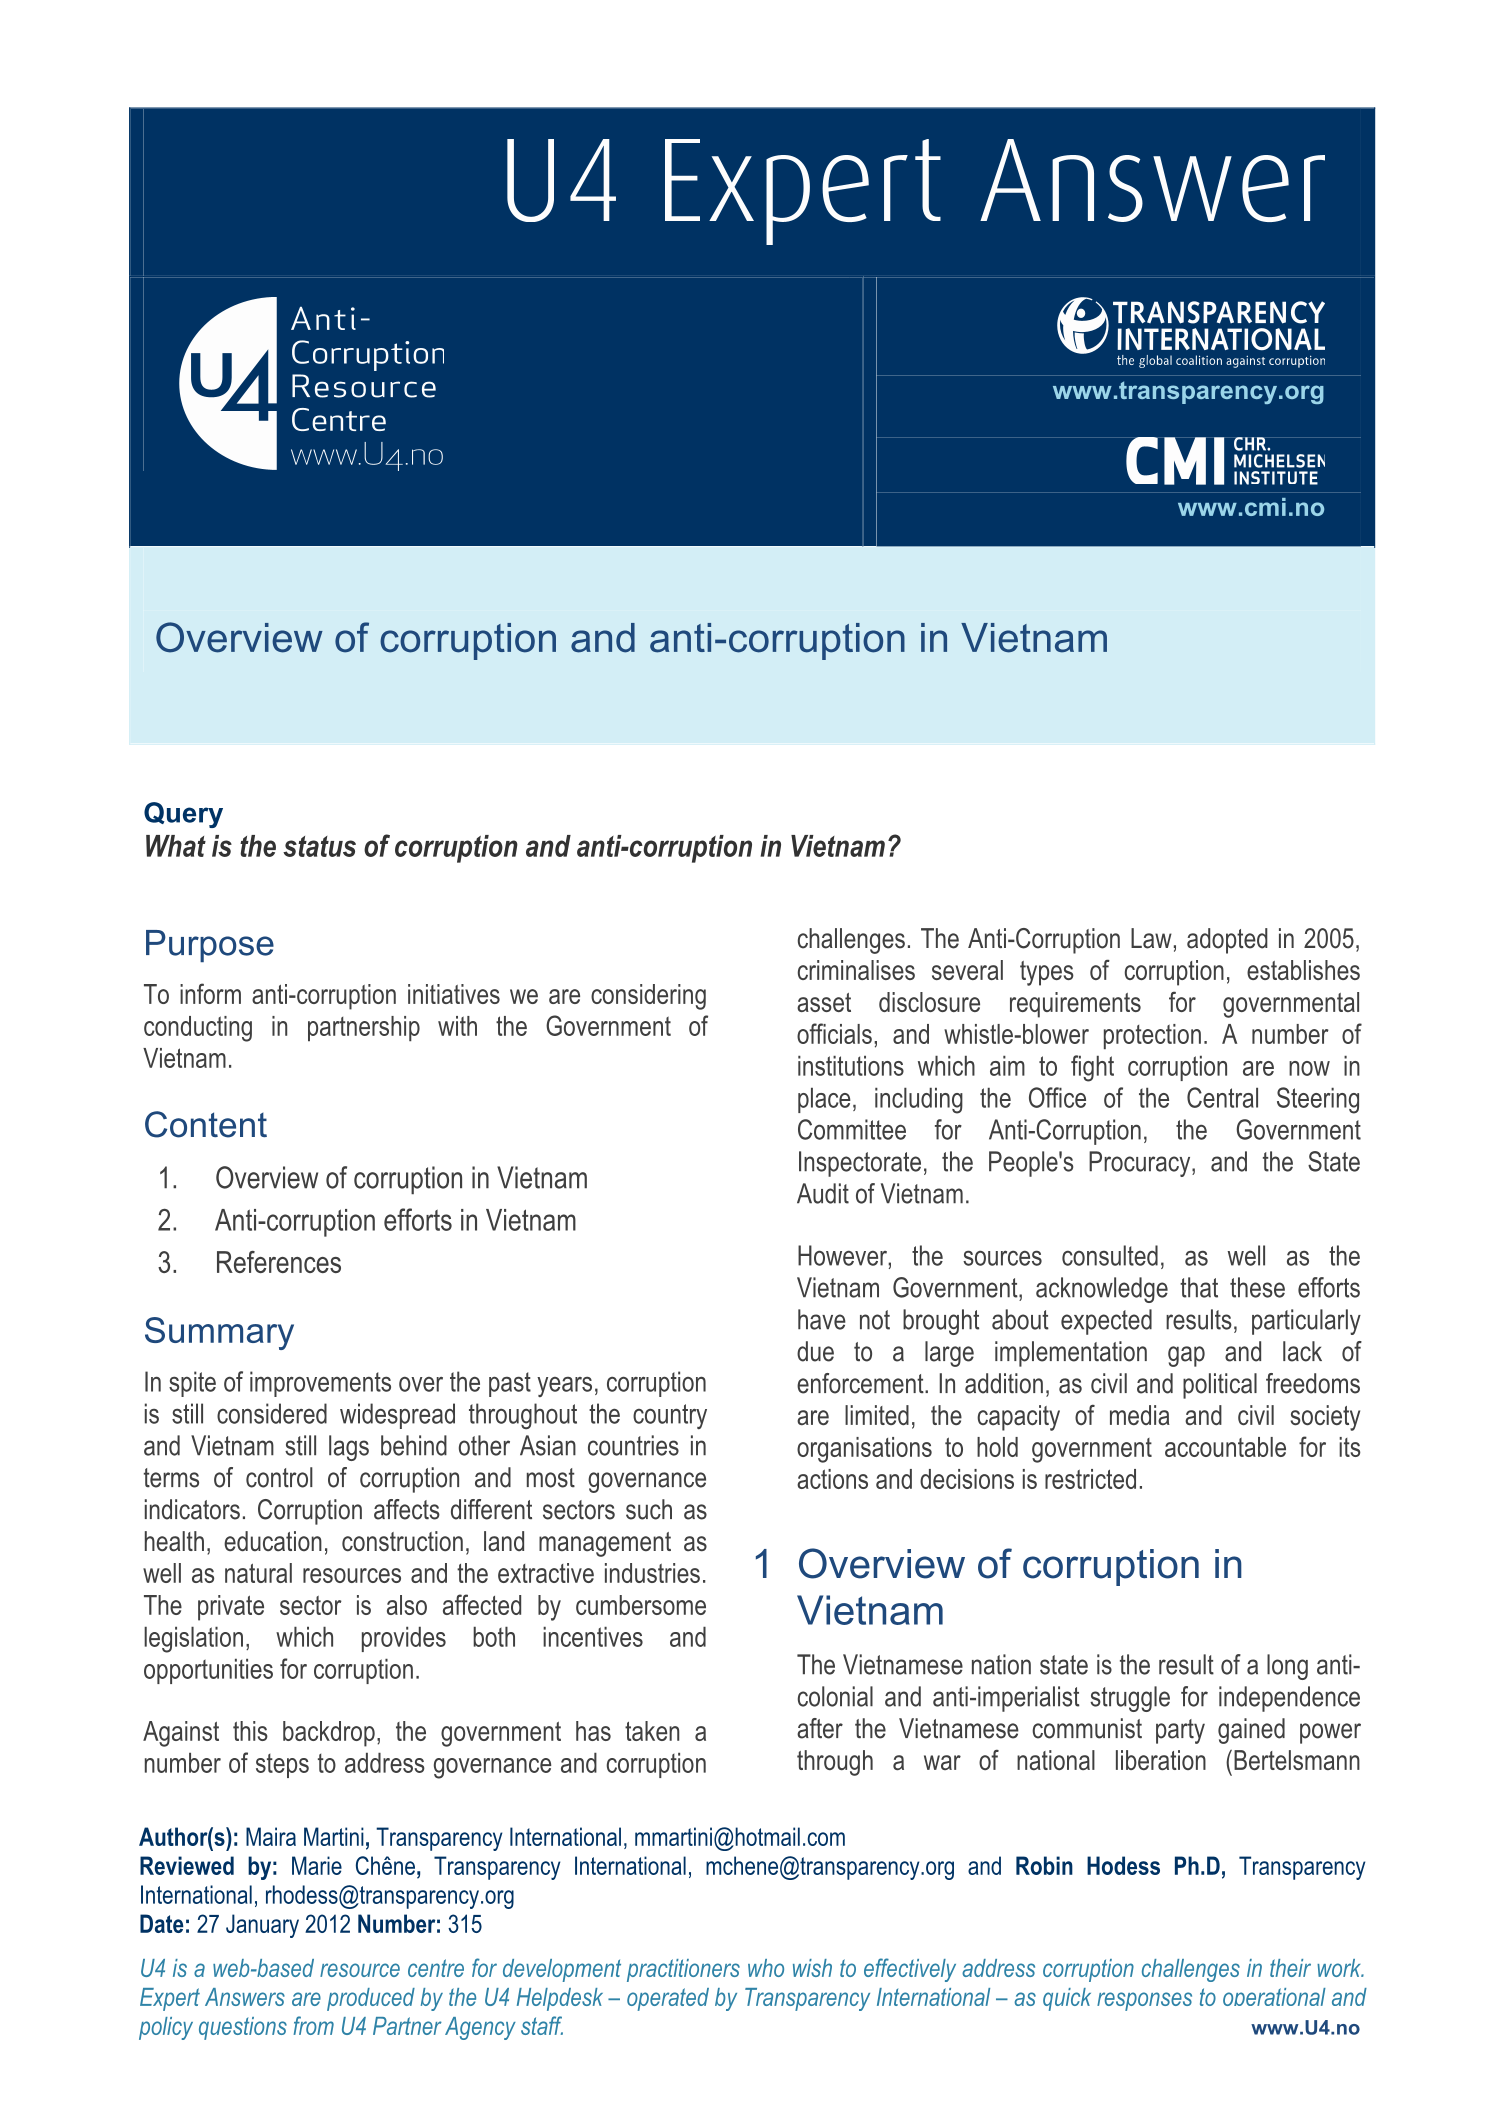 Overview of corruption and anti-corruption in Vietnam